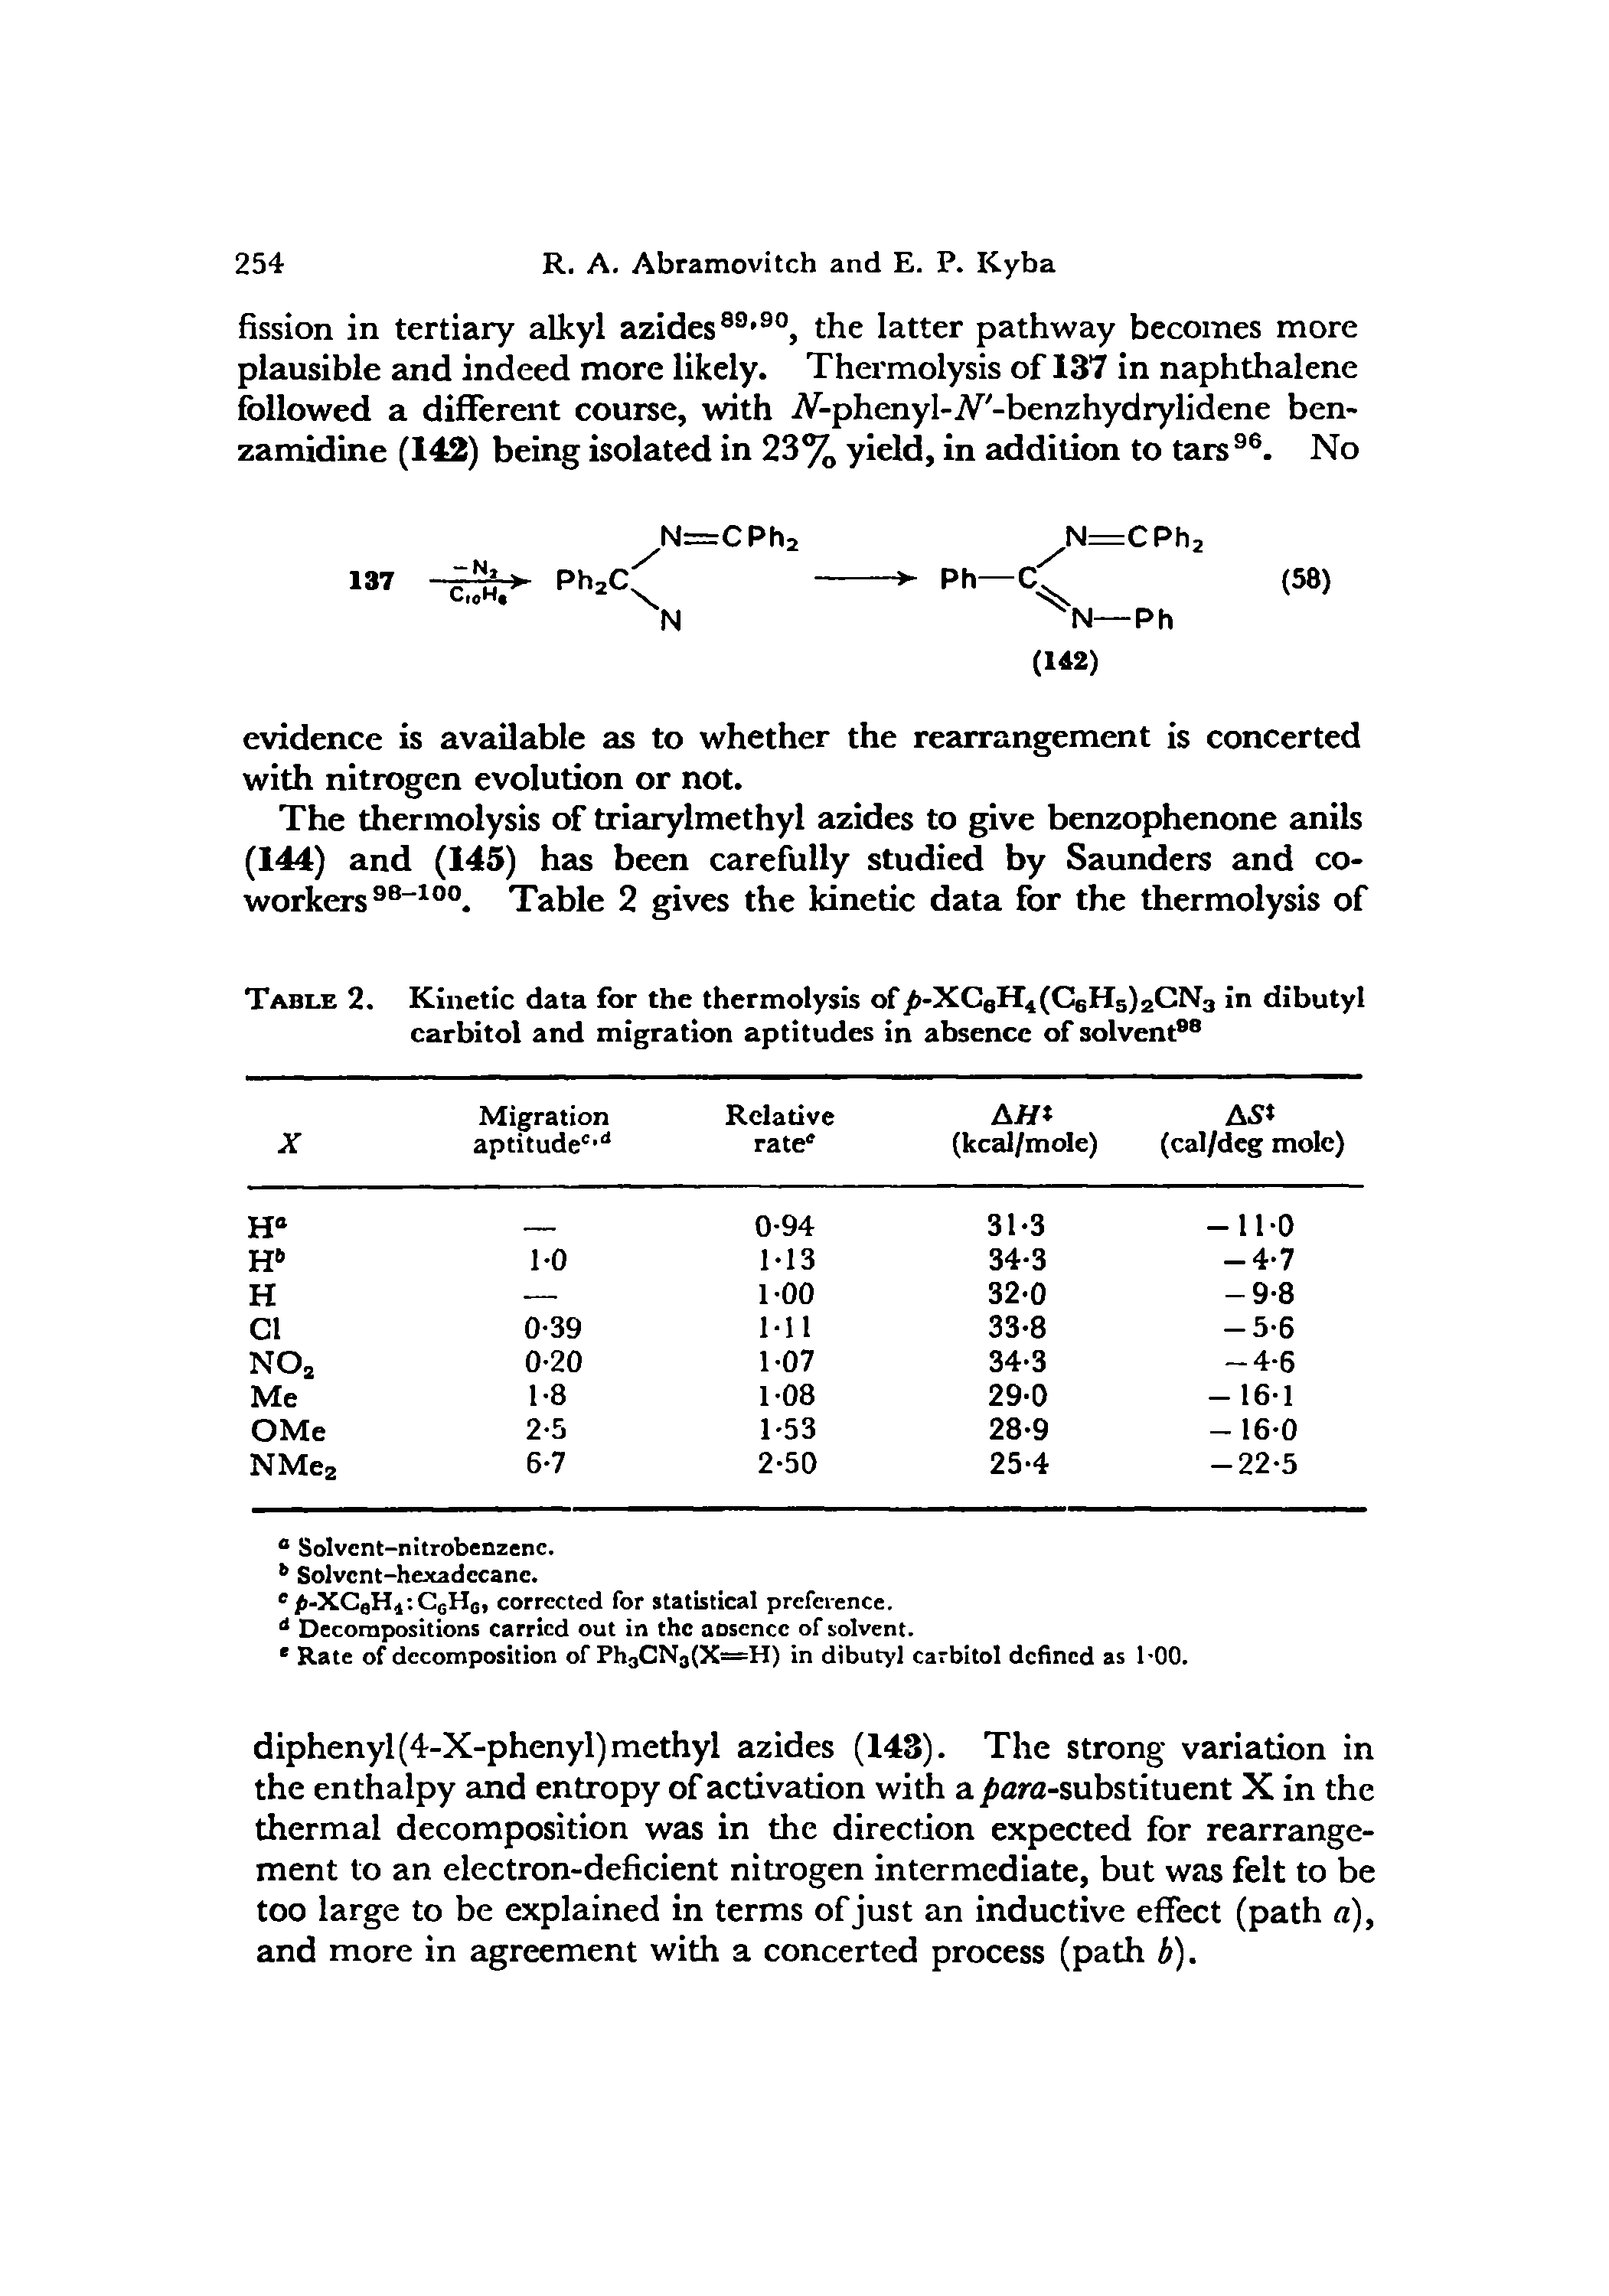 Table 2. Kinetic data for the thermolysis of -XC8H4(C6H5)2CN3 in dibutyl carbitol and migration aptitudes in absence of solvent ...